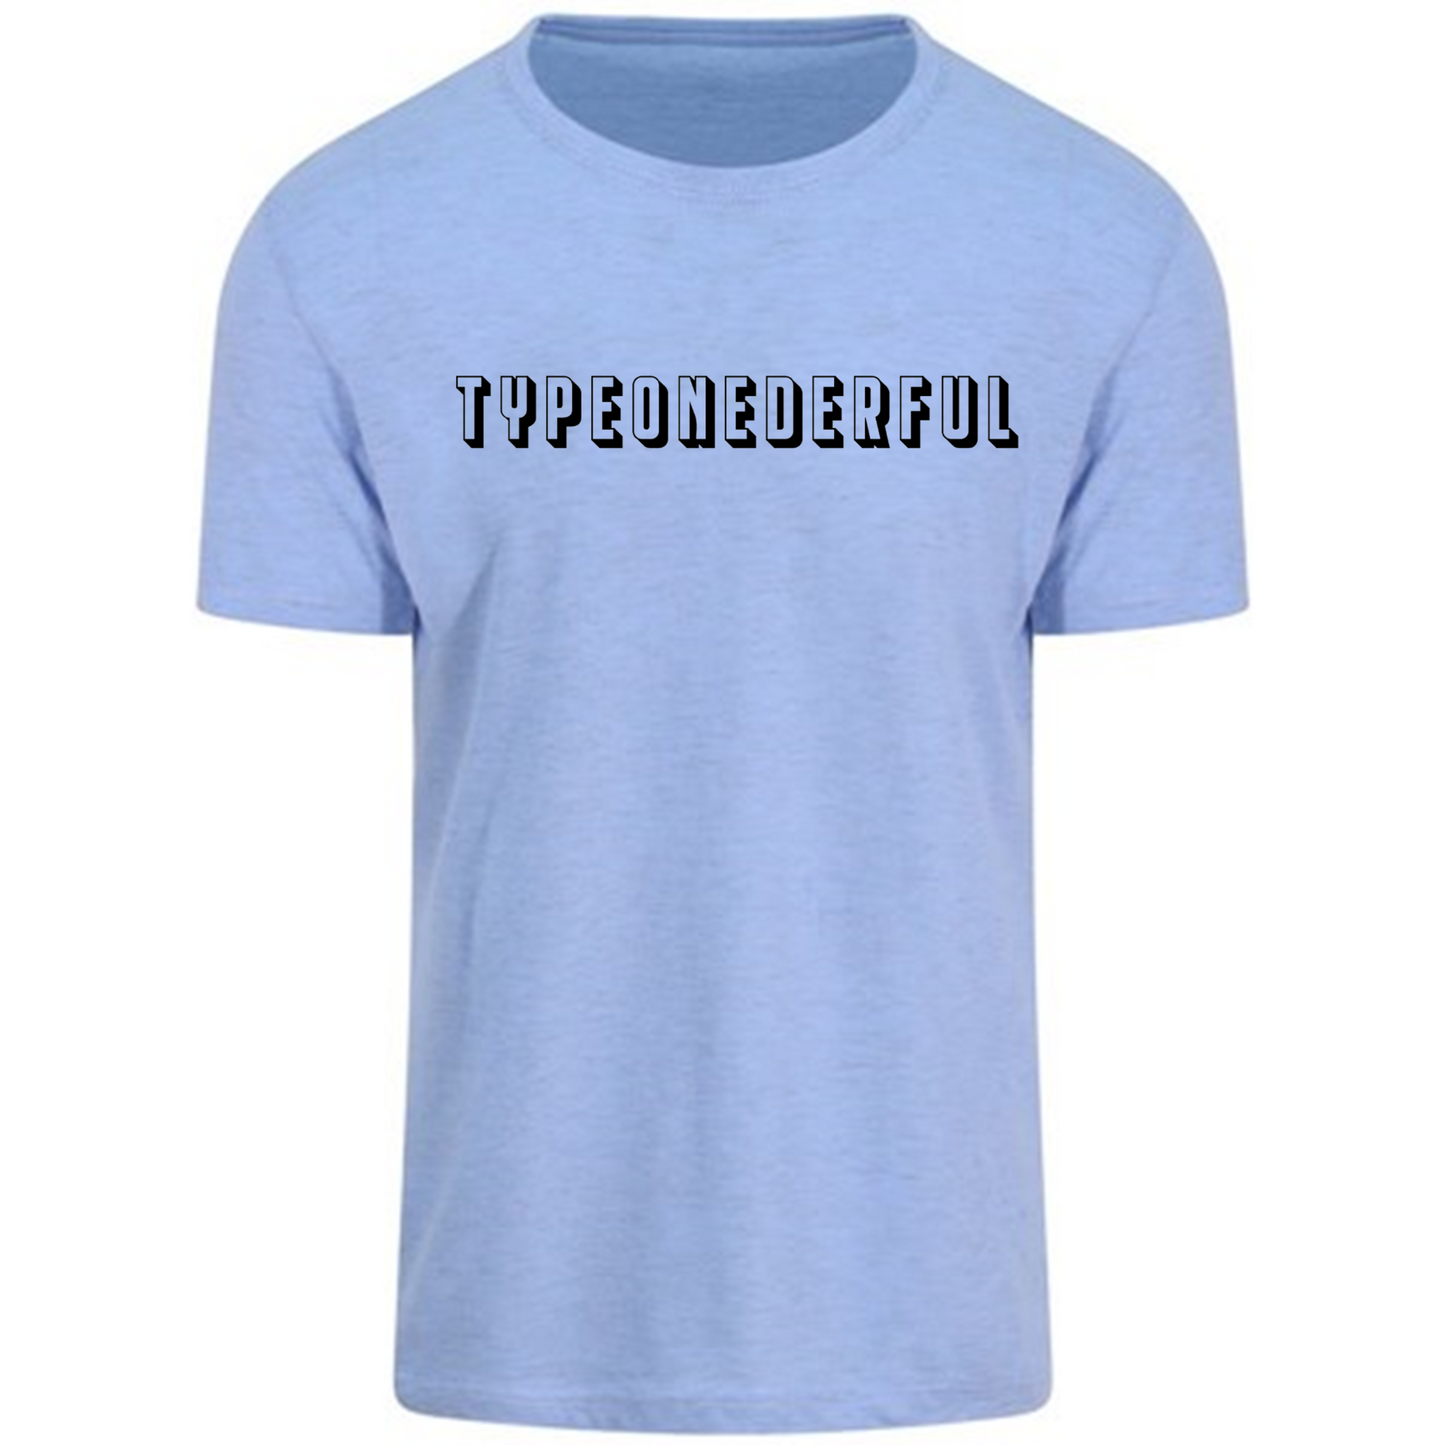 Typeonederful Pastel T-Shirt